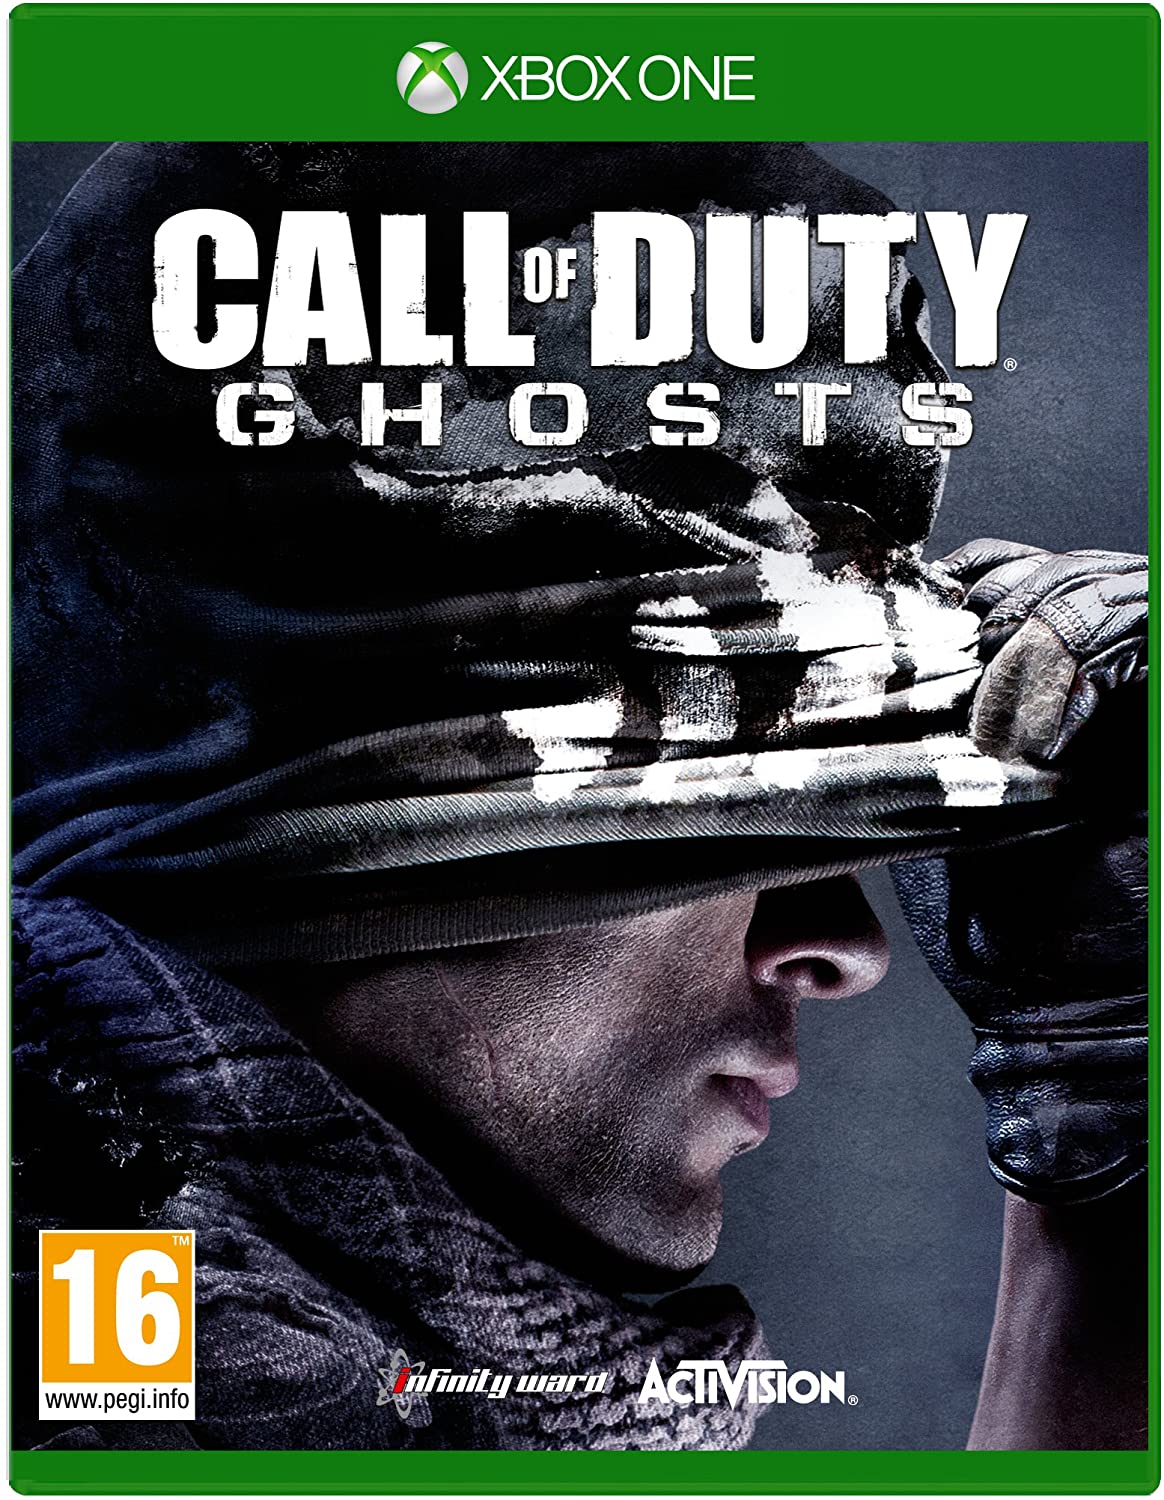 Call of Duty: Ghosts Gold XBOX ONE / SERIES X|S Ключ 🔑